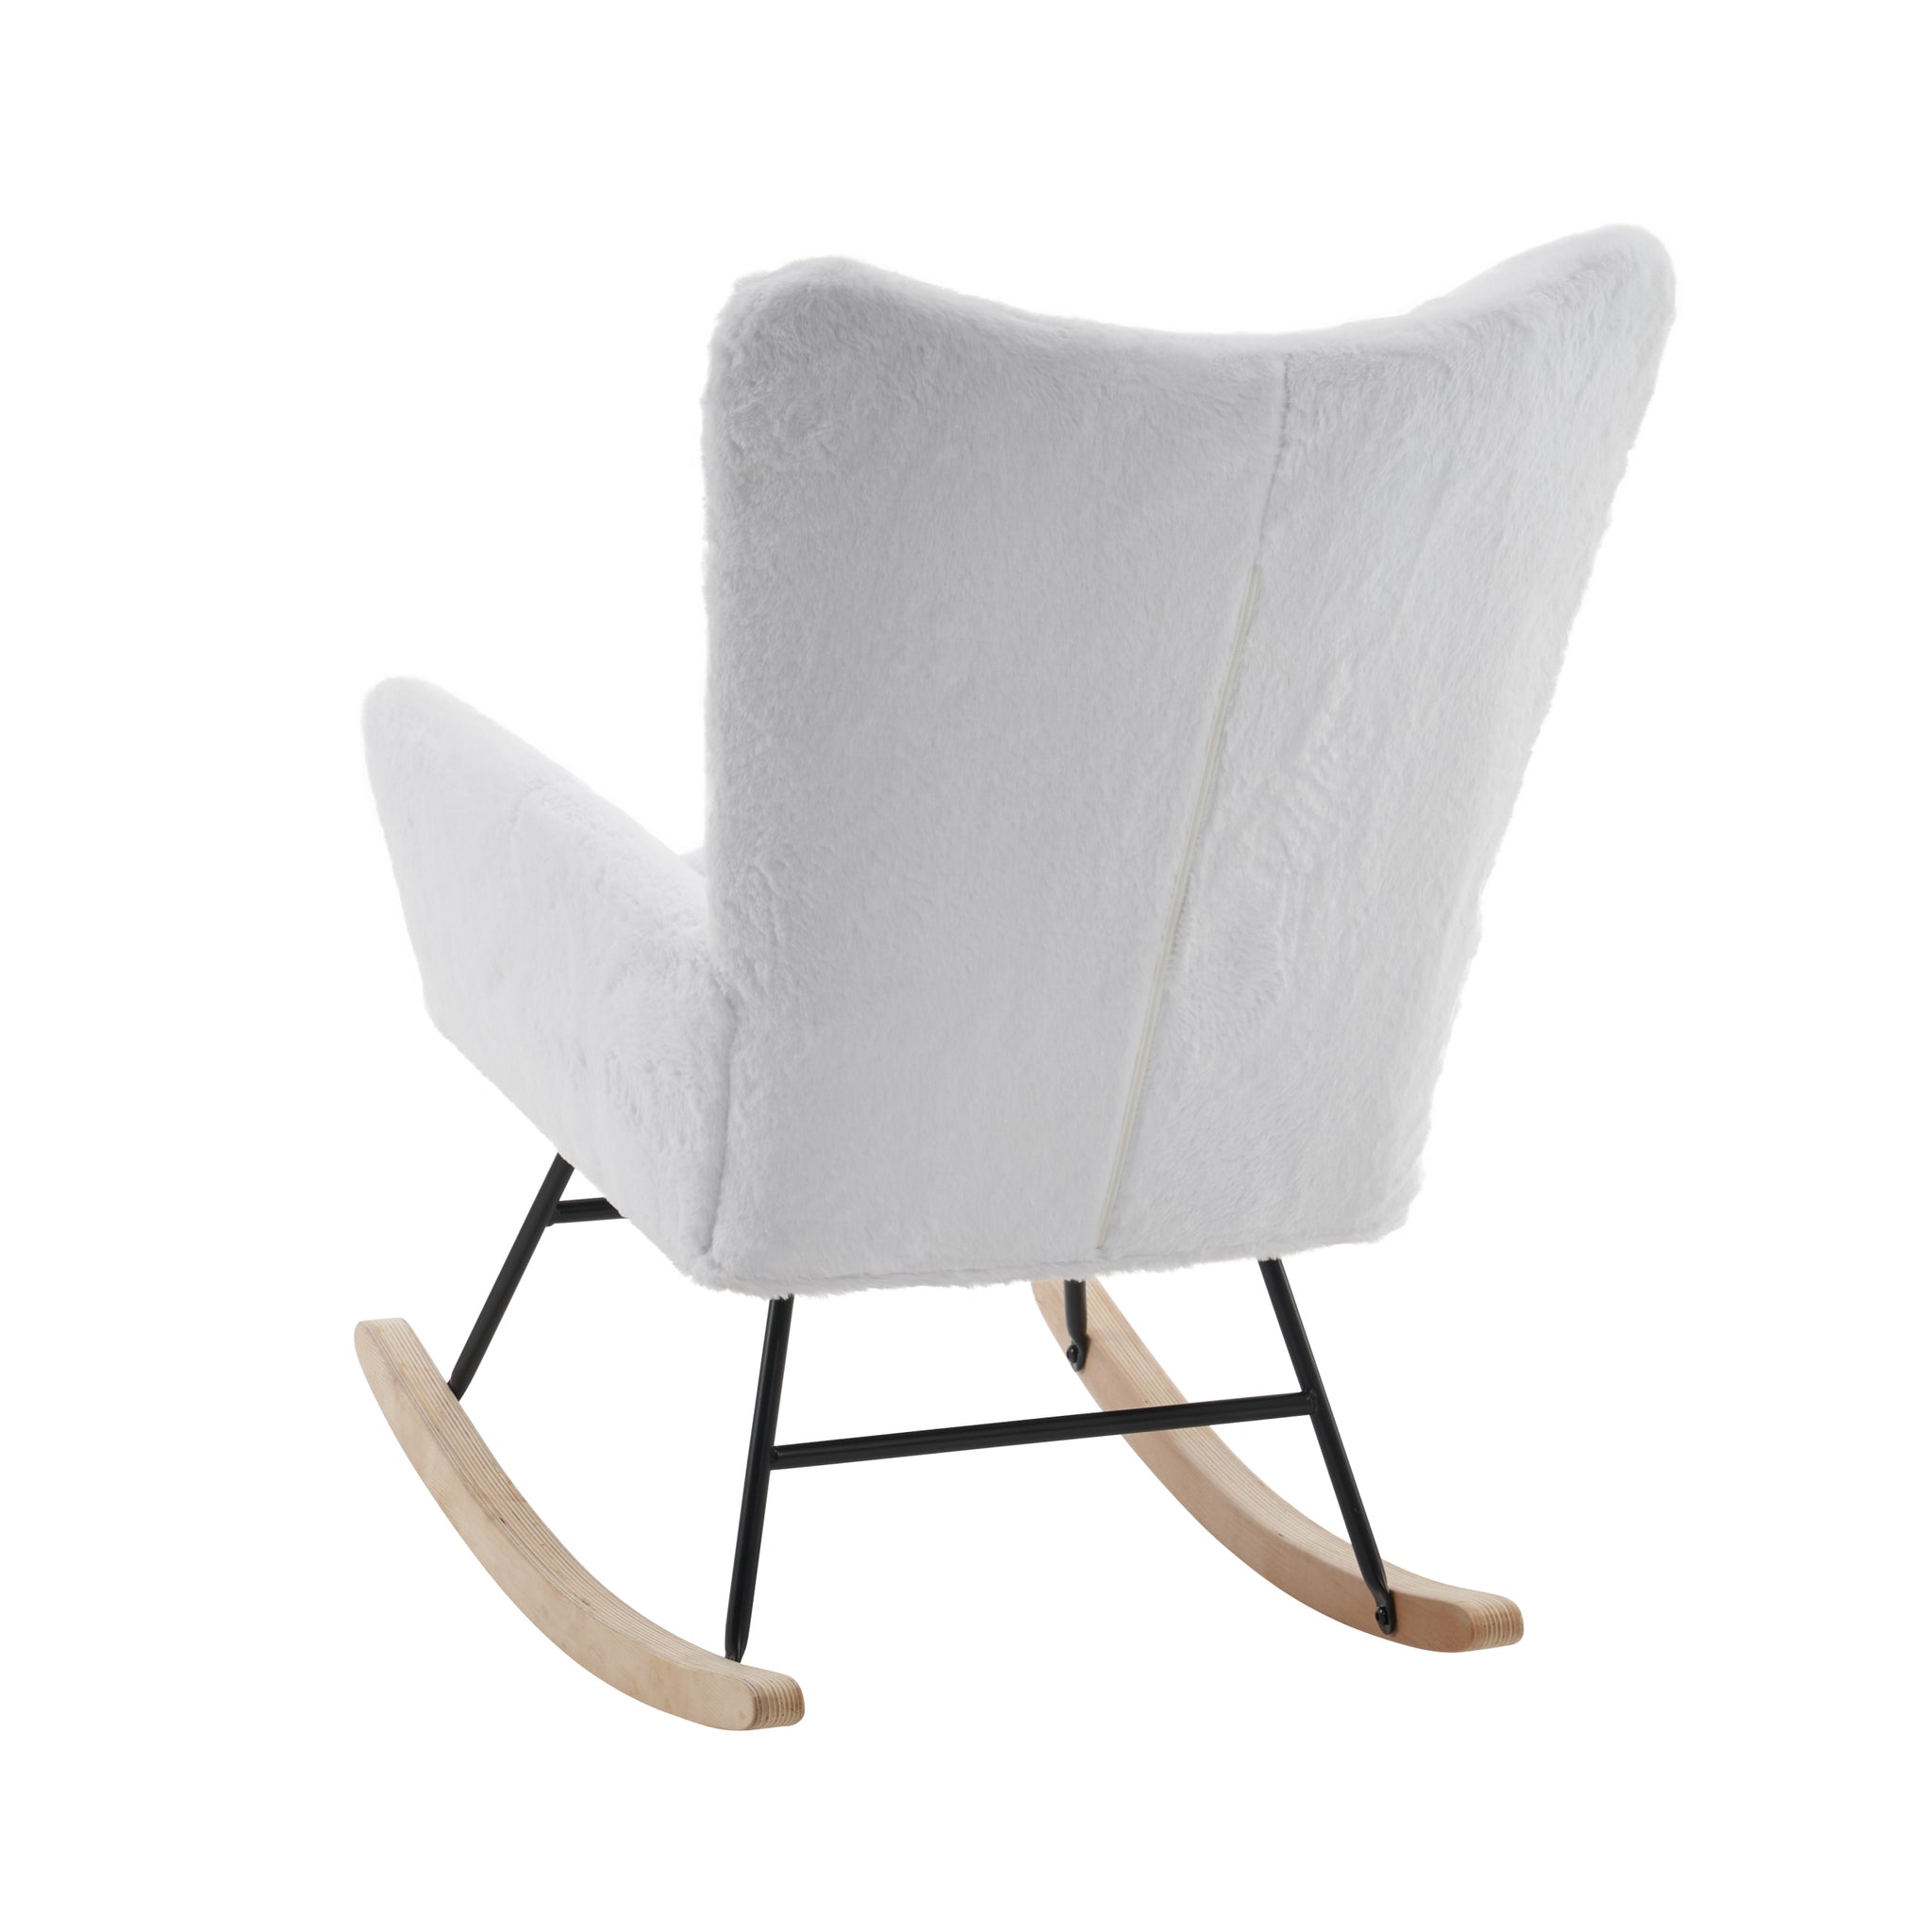 Rocking Chair Nursery, Solid Wood Legs Reading Chair white-primary living space-modern-rocking